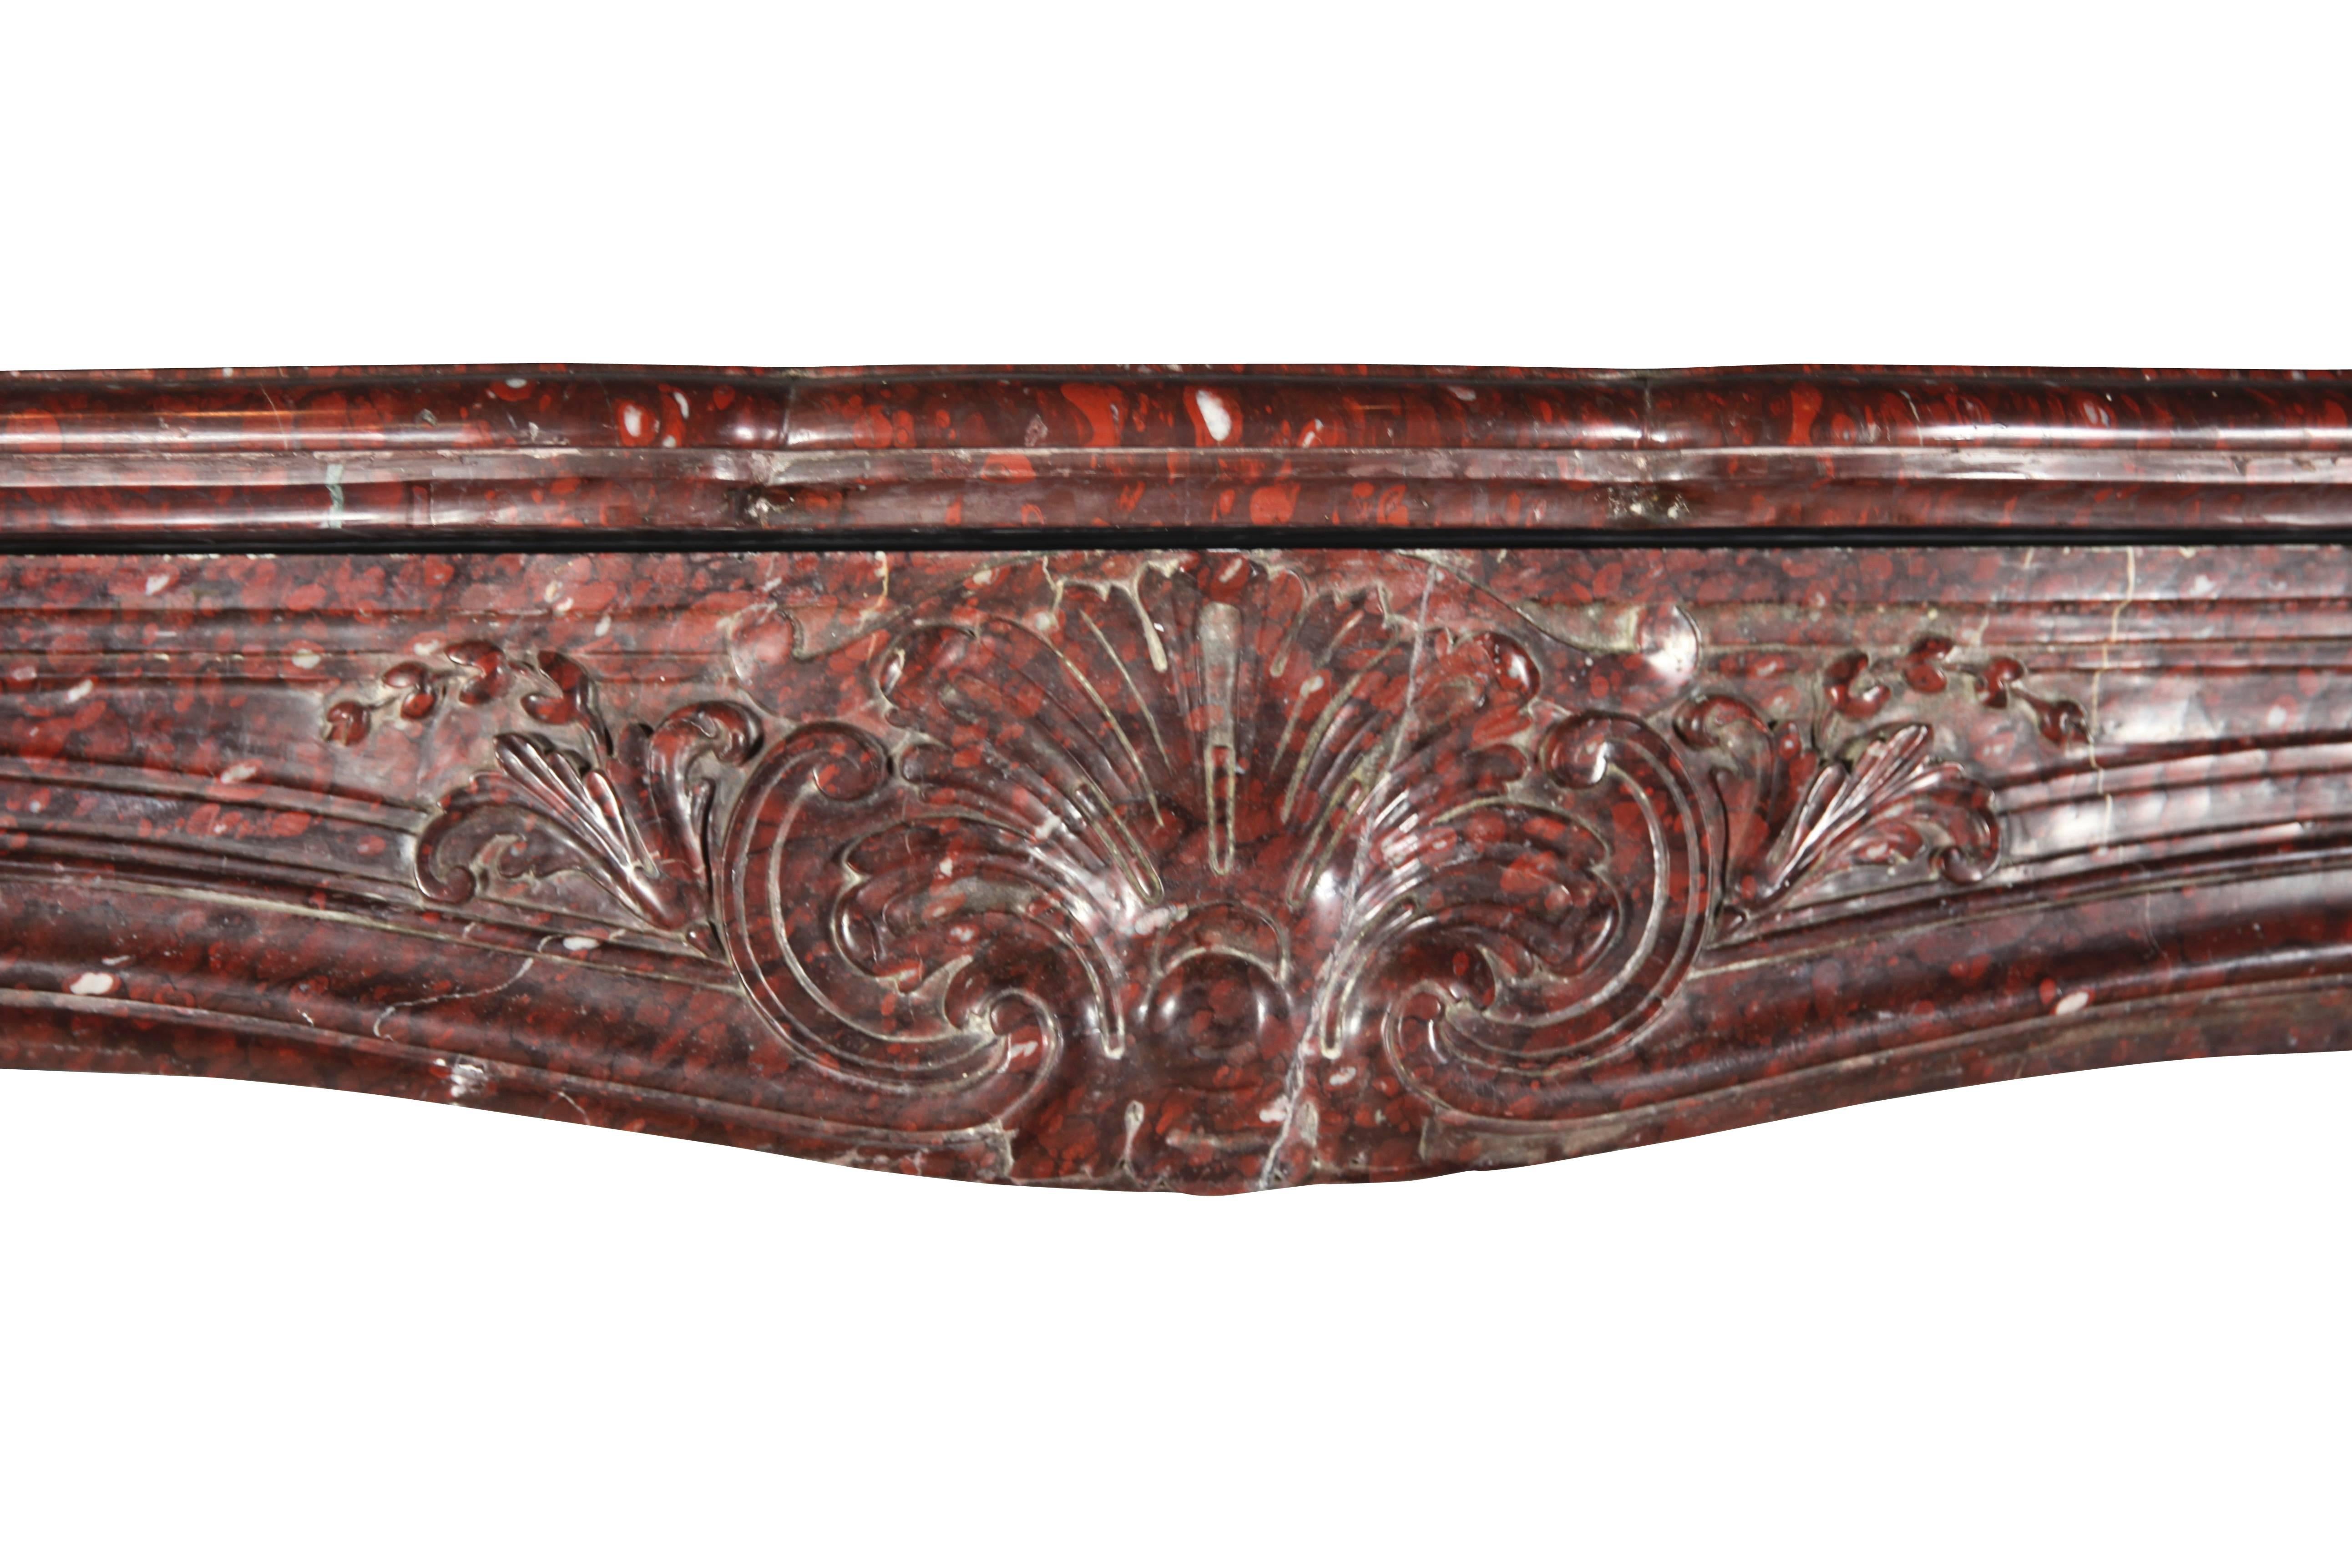 This Museum quality original antique fireplace mantle in Rouge Griotte marble was installed in Grand interior in Paris. It is a Regency Rococo style from the 19th century. The front is massive while carving is ultra delicate. A one of a kind piece